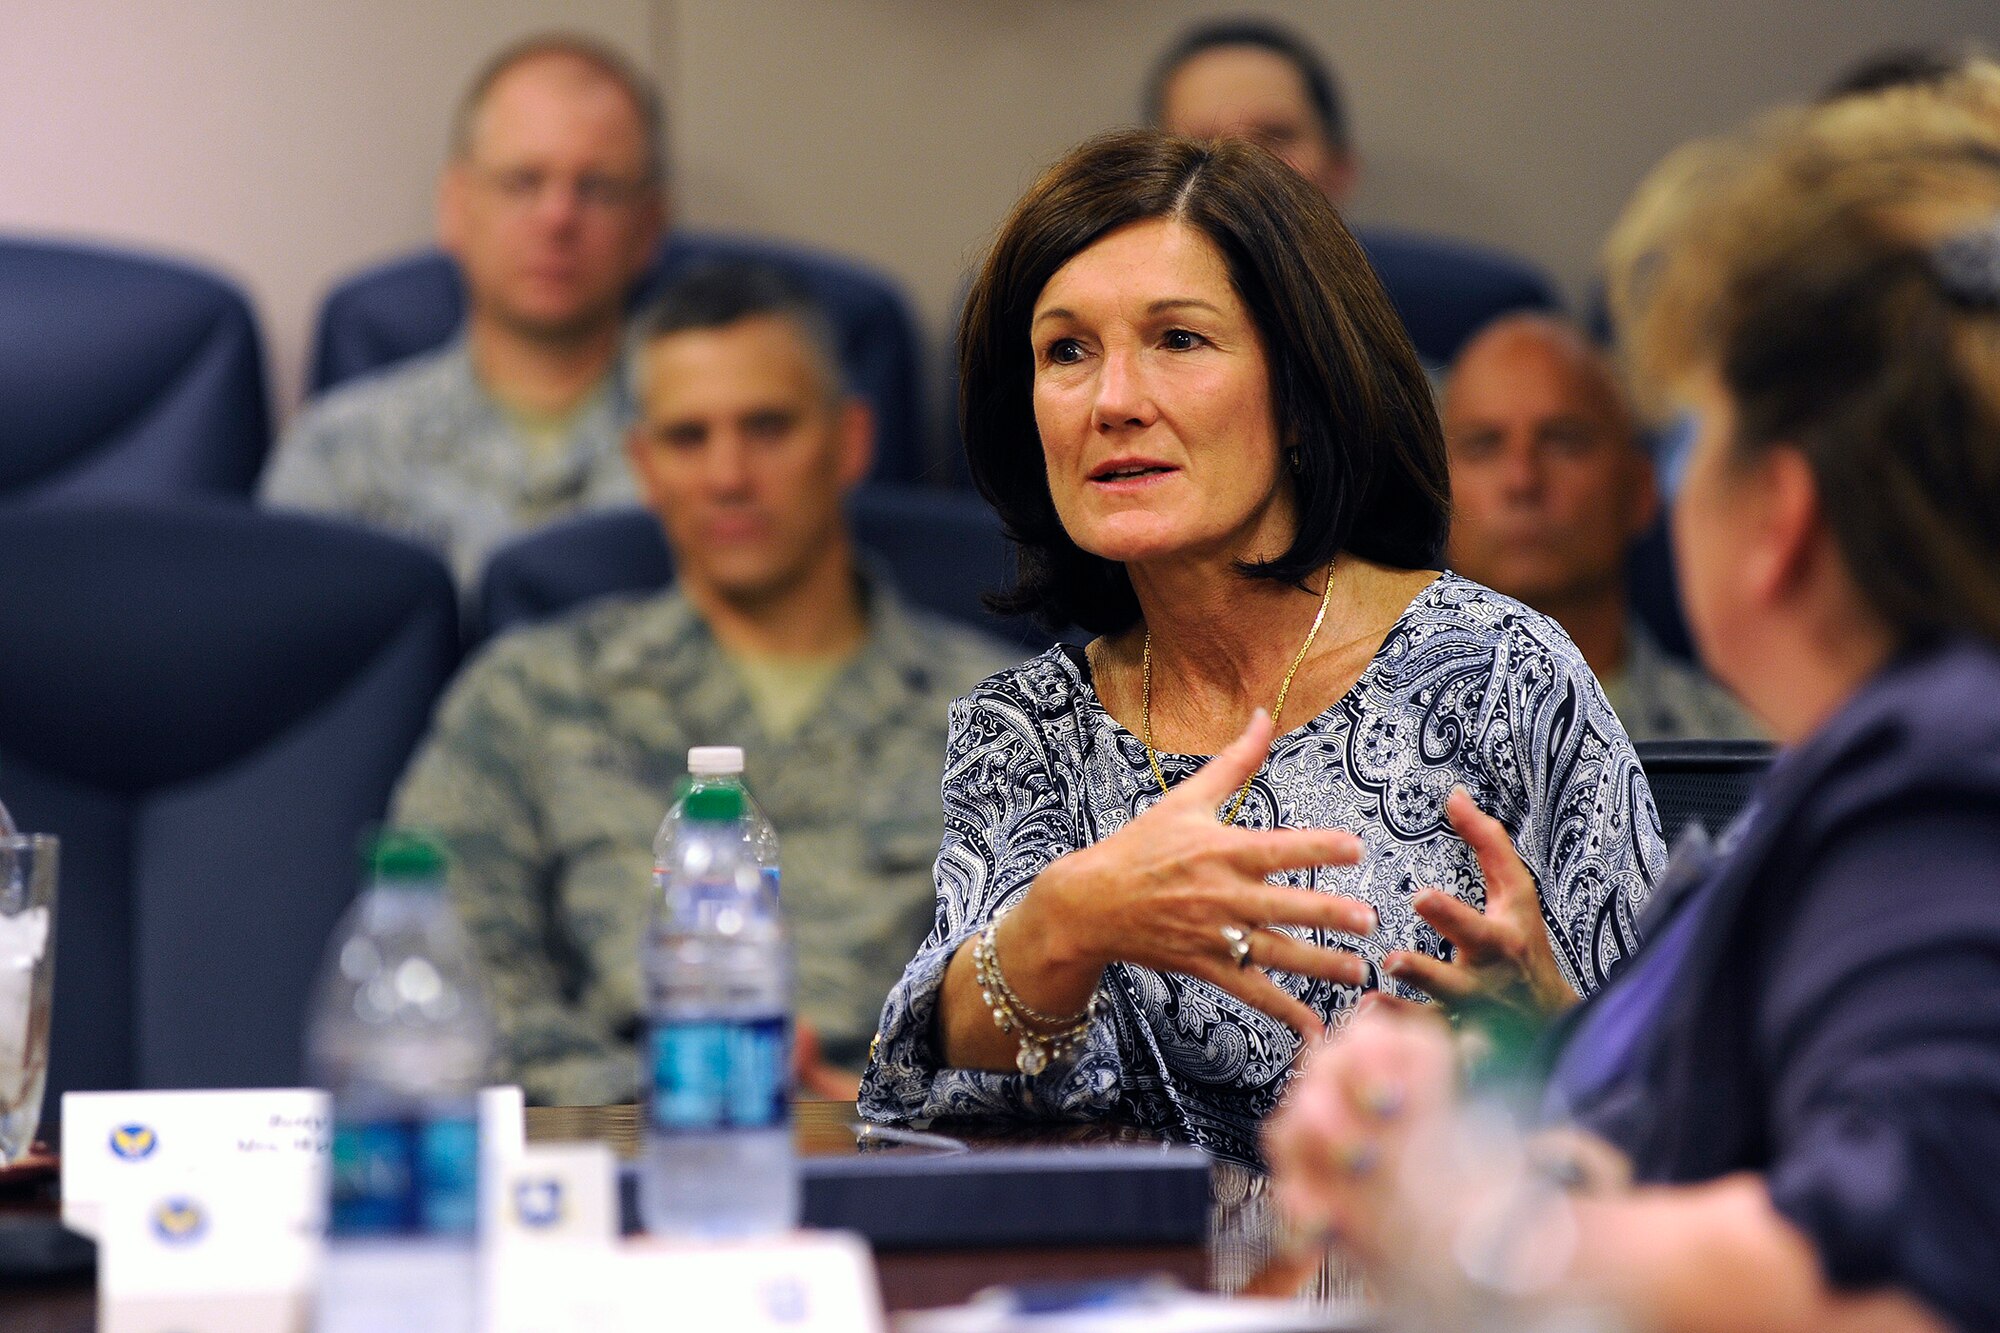 Betty Welsh, wife of Air Force Chief of Staff Gen. Mark A. Welsh III, discusses the importance of key spouses during a meeting with wing leadership and spouses July 19, 2013, at Schriever Air Force Base. As part of a two-day visit to Colorado Springs, the Chief and his wife thanked Airmen for their continued service and dedication, and addressed issues concerning Airmen and their families. (U.S. Air Force photo/Dennis Rogers)